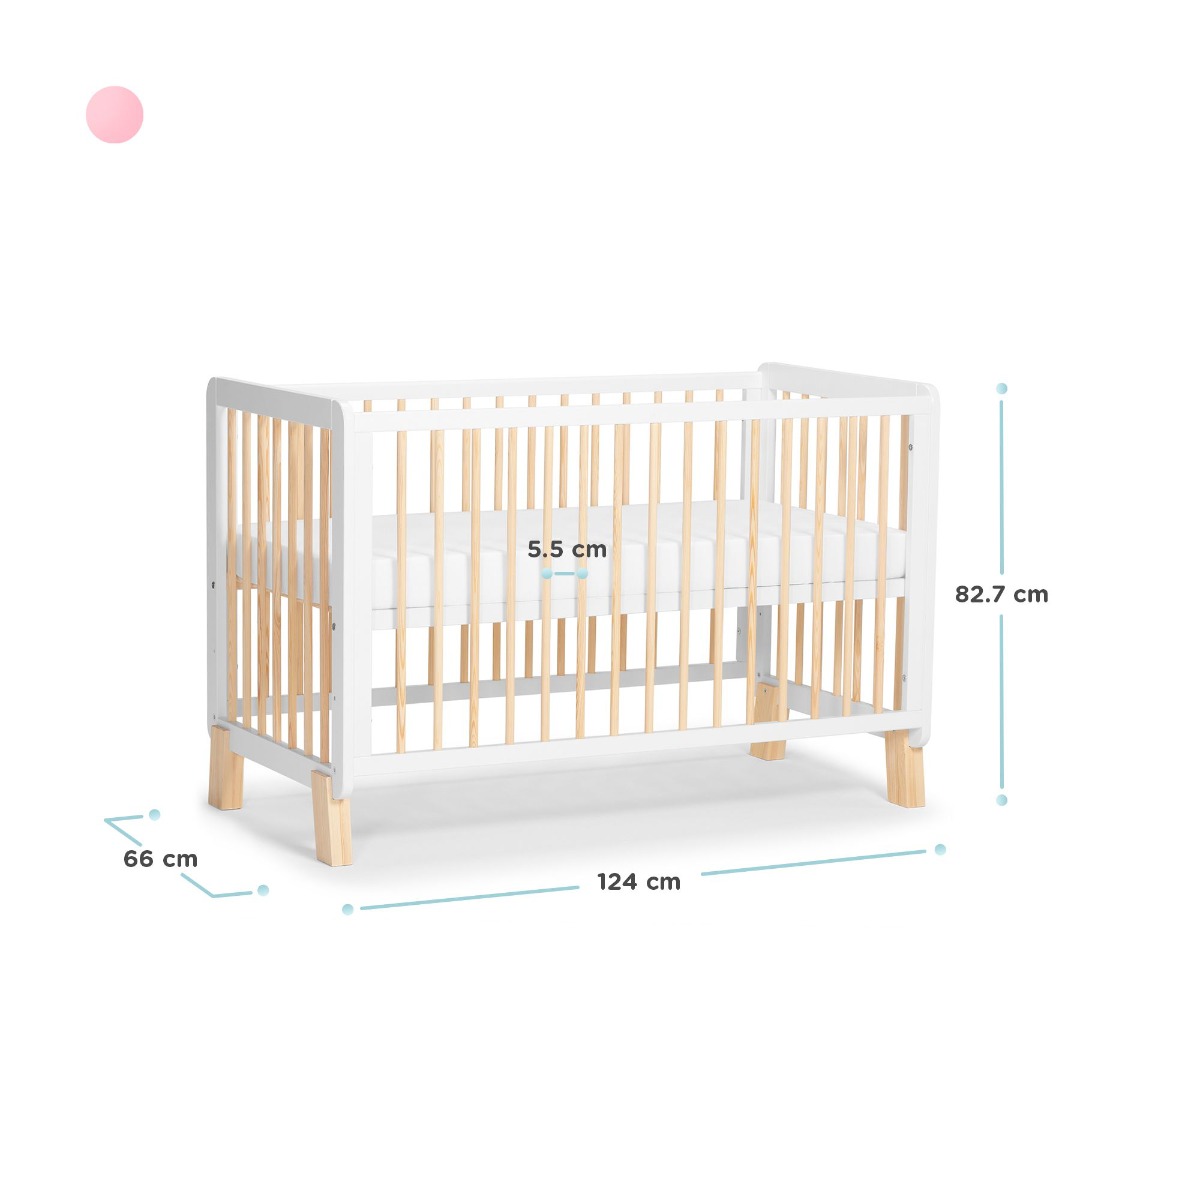 Wooden Cot with Mattress LUNKY